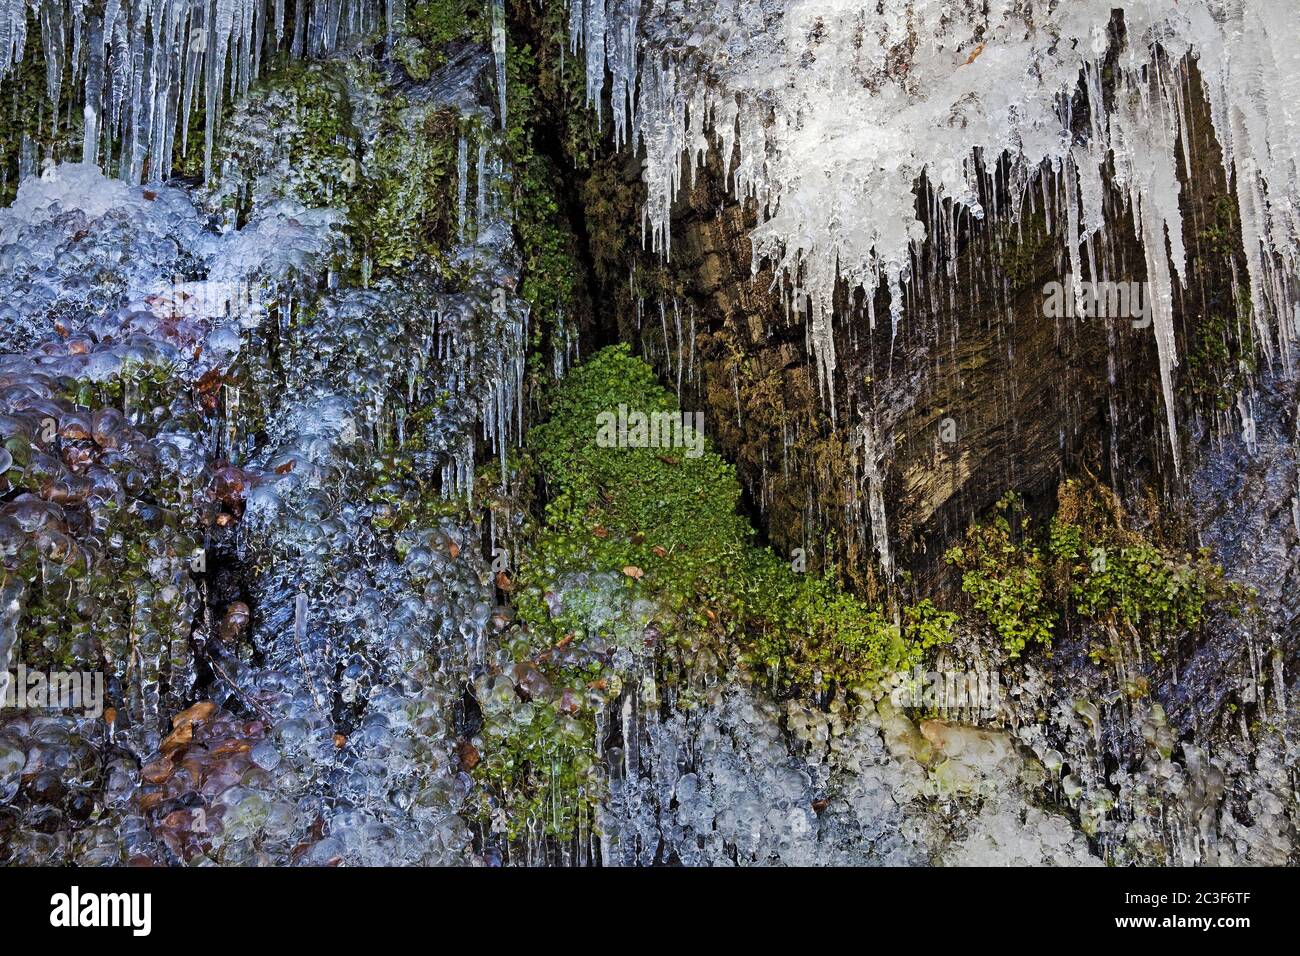 Ice cones at the Plaesterlegge waterfall in winter, Bestwig, Sauerland, Germany, Europe Stock Photo